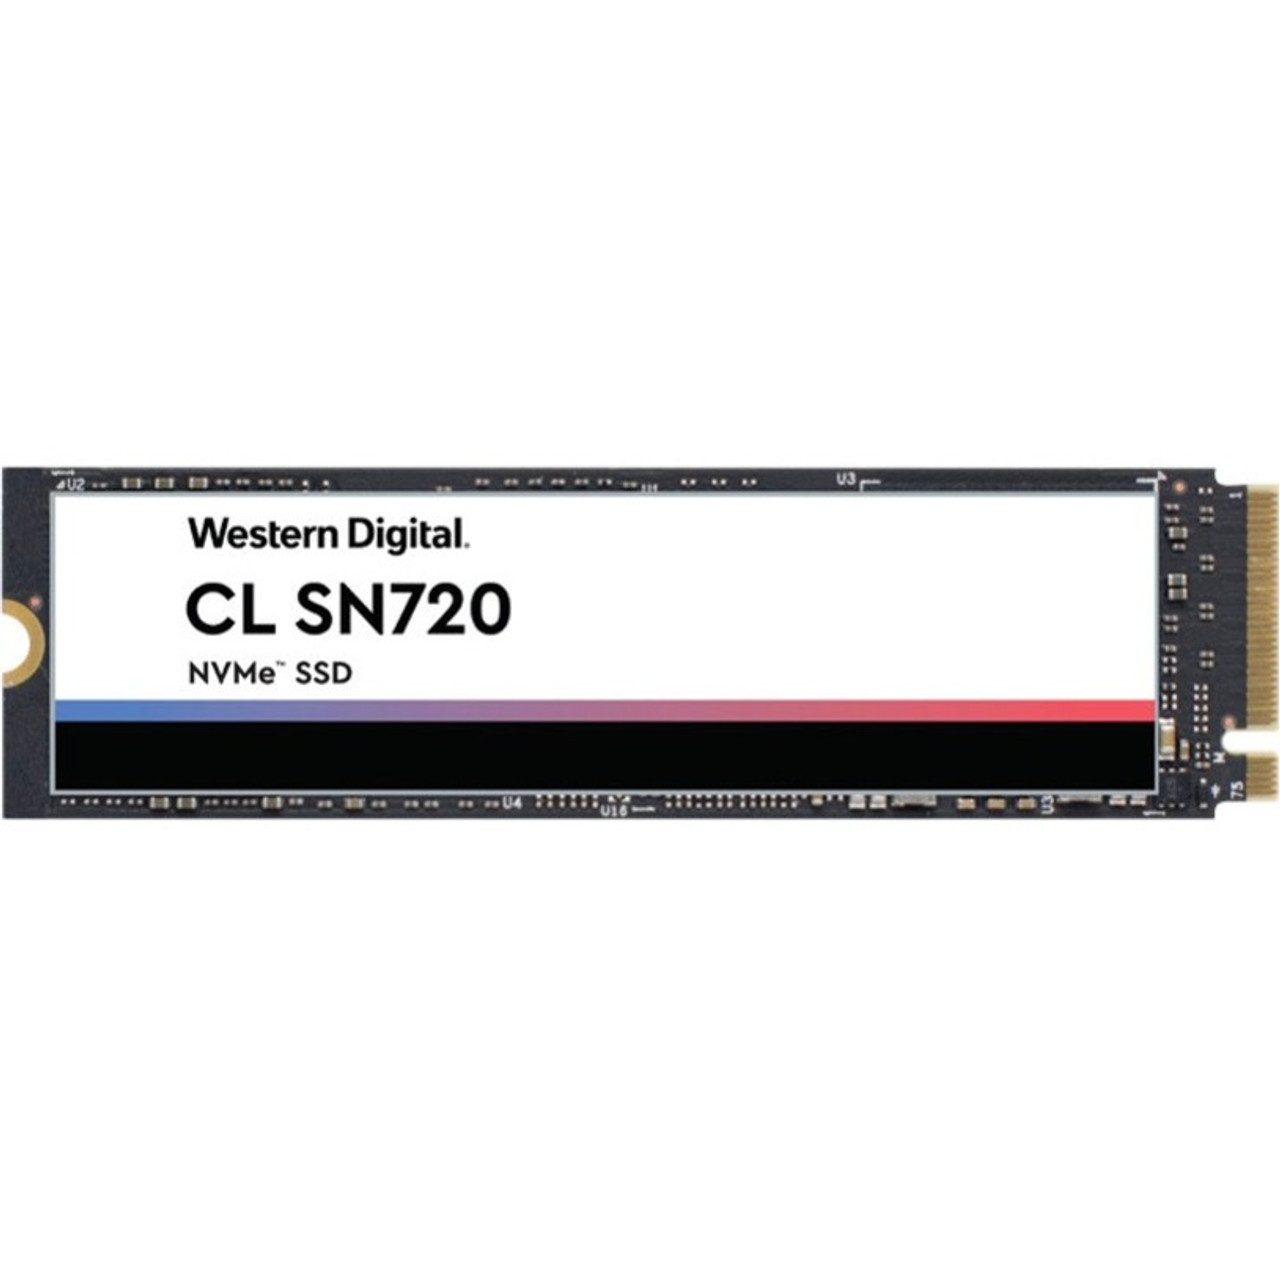 WD CL SN720 2 TB Solid State Drive - M.2 2280 Internal - PCI Express NVMe